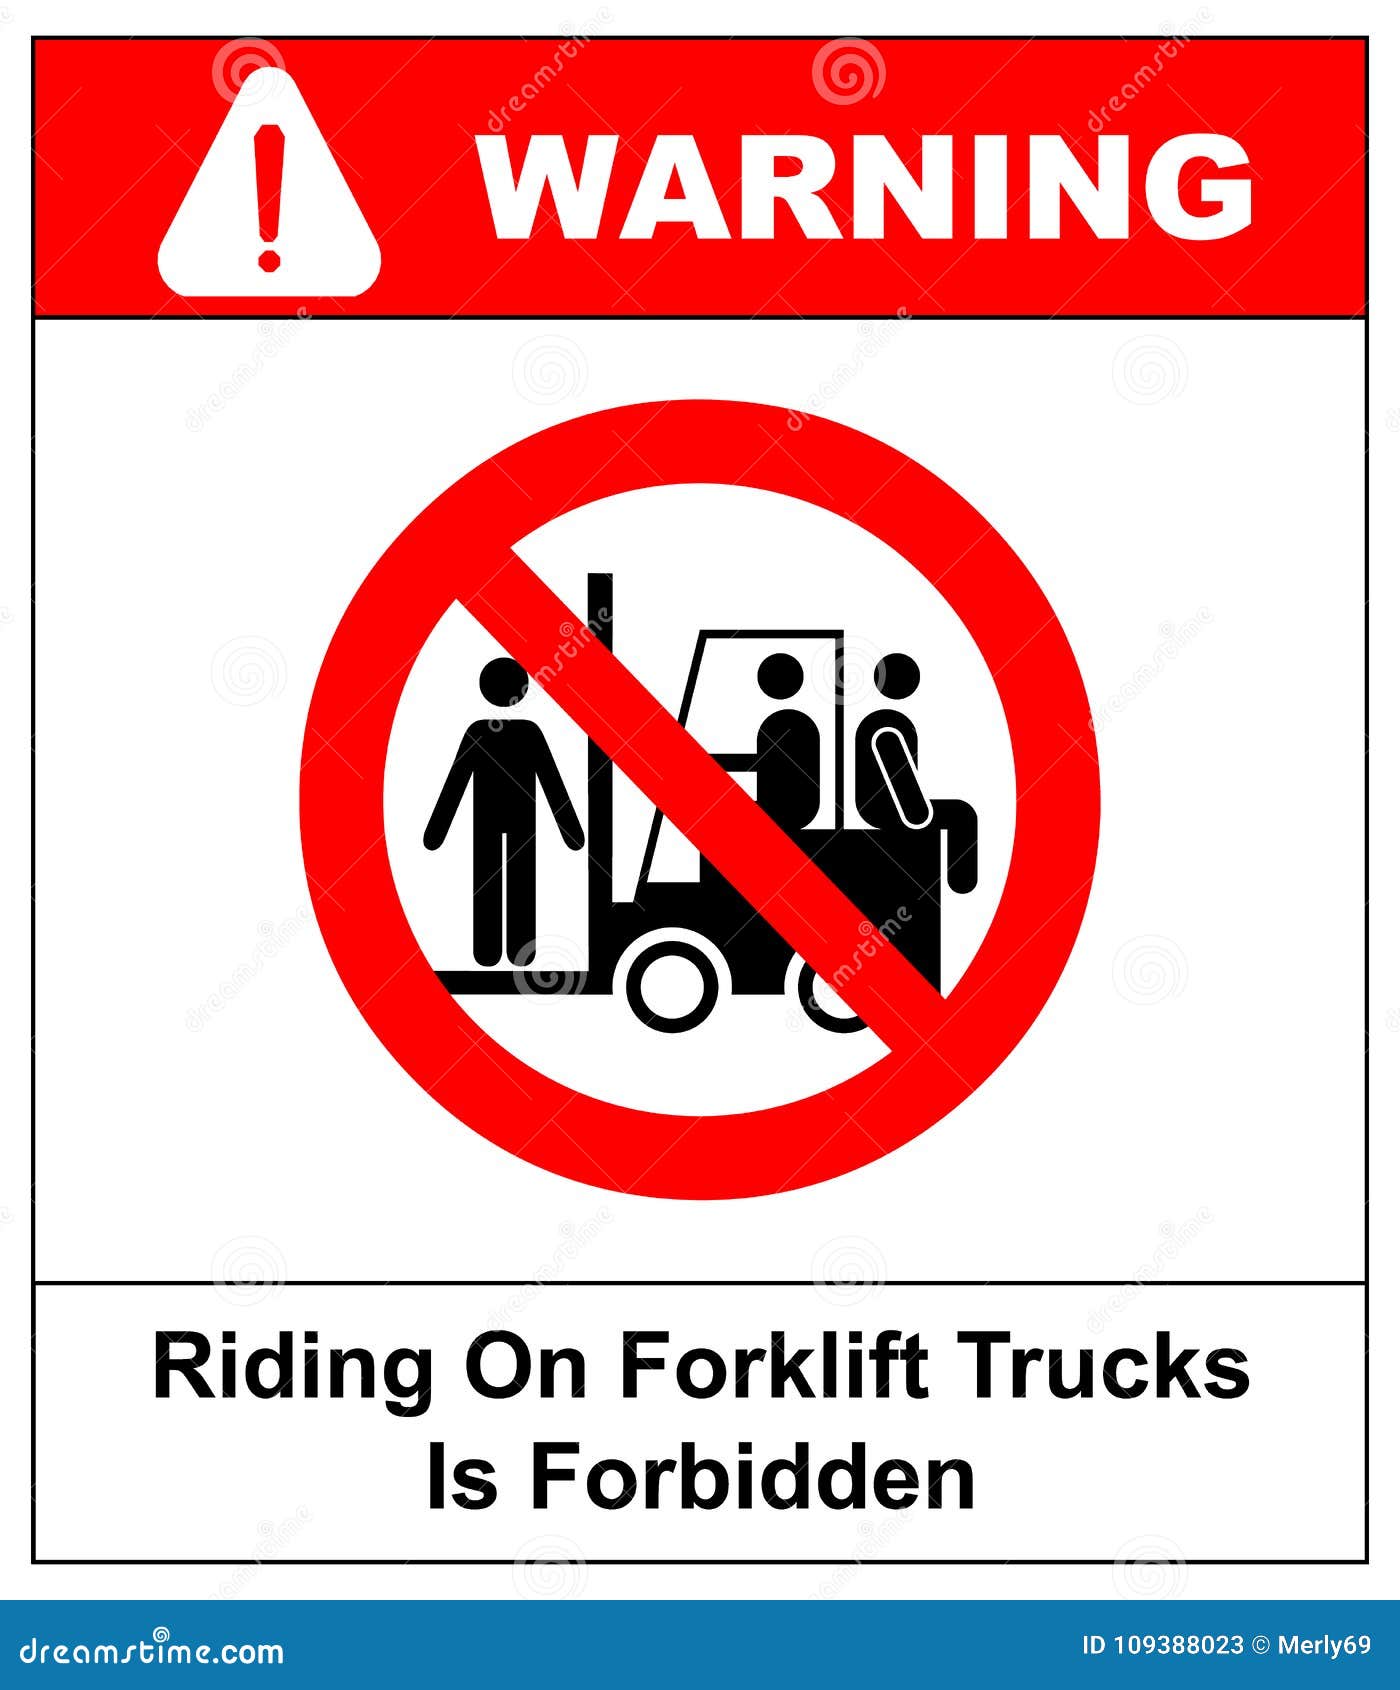 Riding On Forklift Trucks Is Forbidden Symbol Occupational Safety And Health Signs Do Not Ride On Forklift Vector Stock Vector Illustration Of Forbidden Caution 109388023